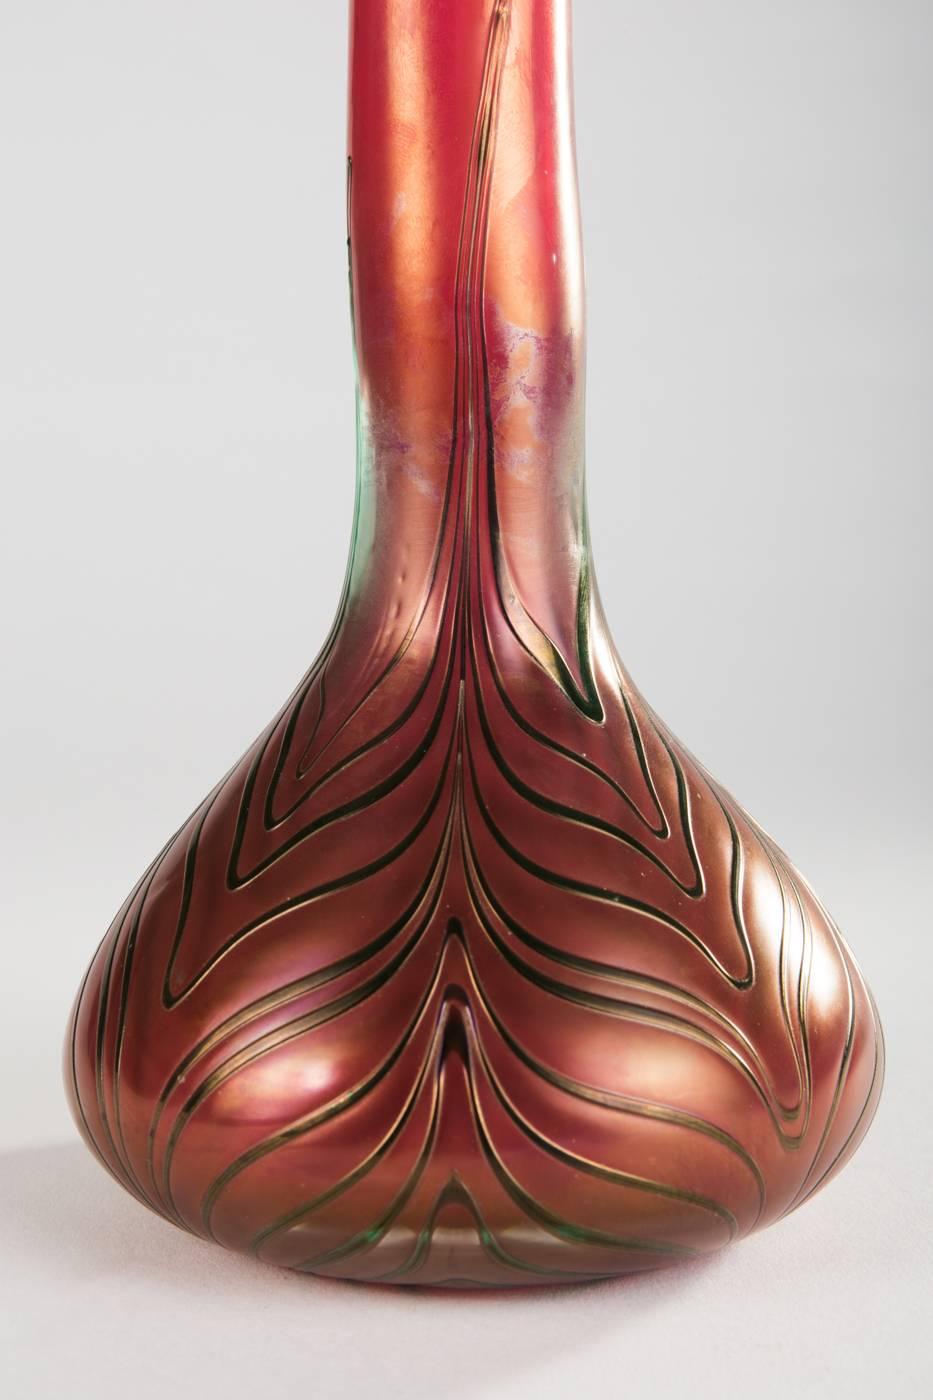 Early 20th Century Art Nouveau Bohemian Glass Vase with Spiral Melting by Kralik For Sale